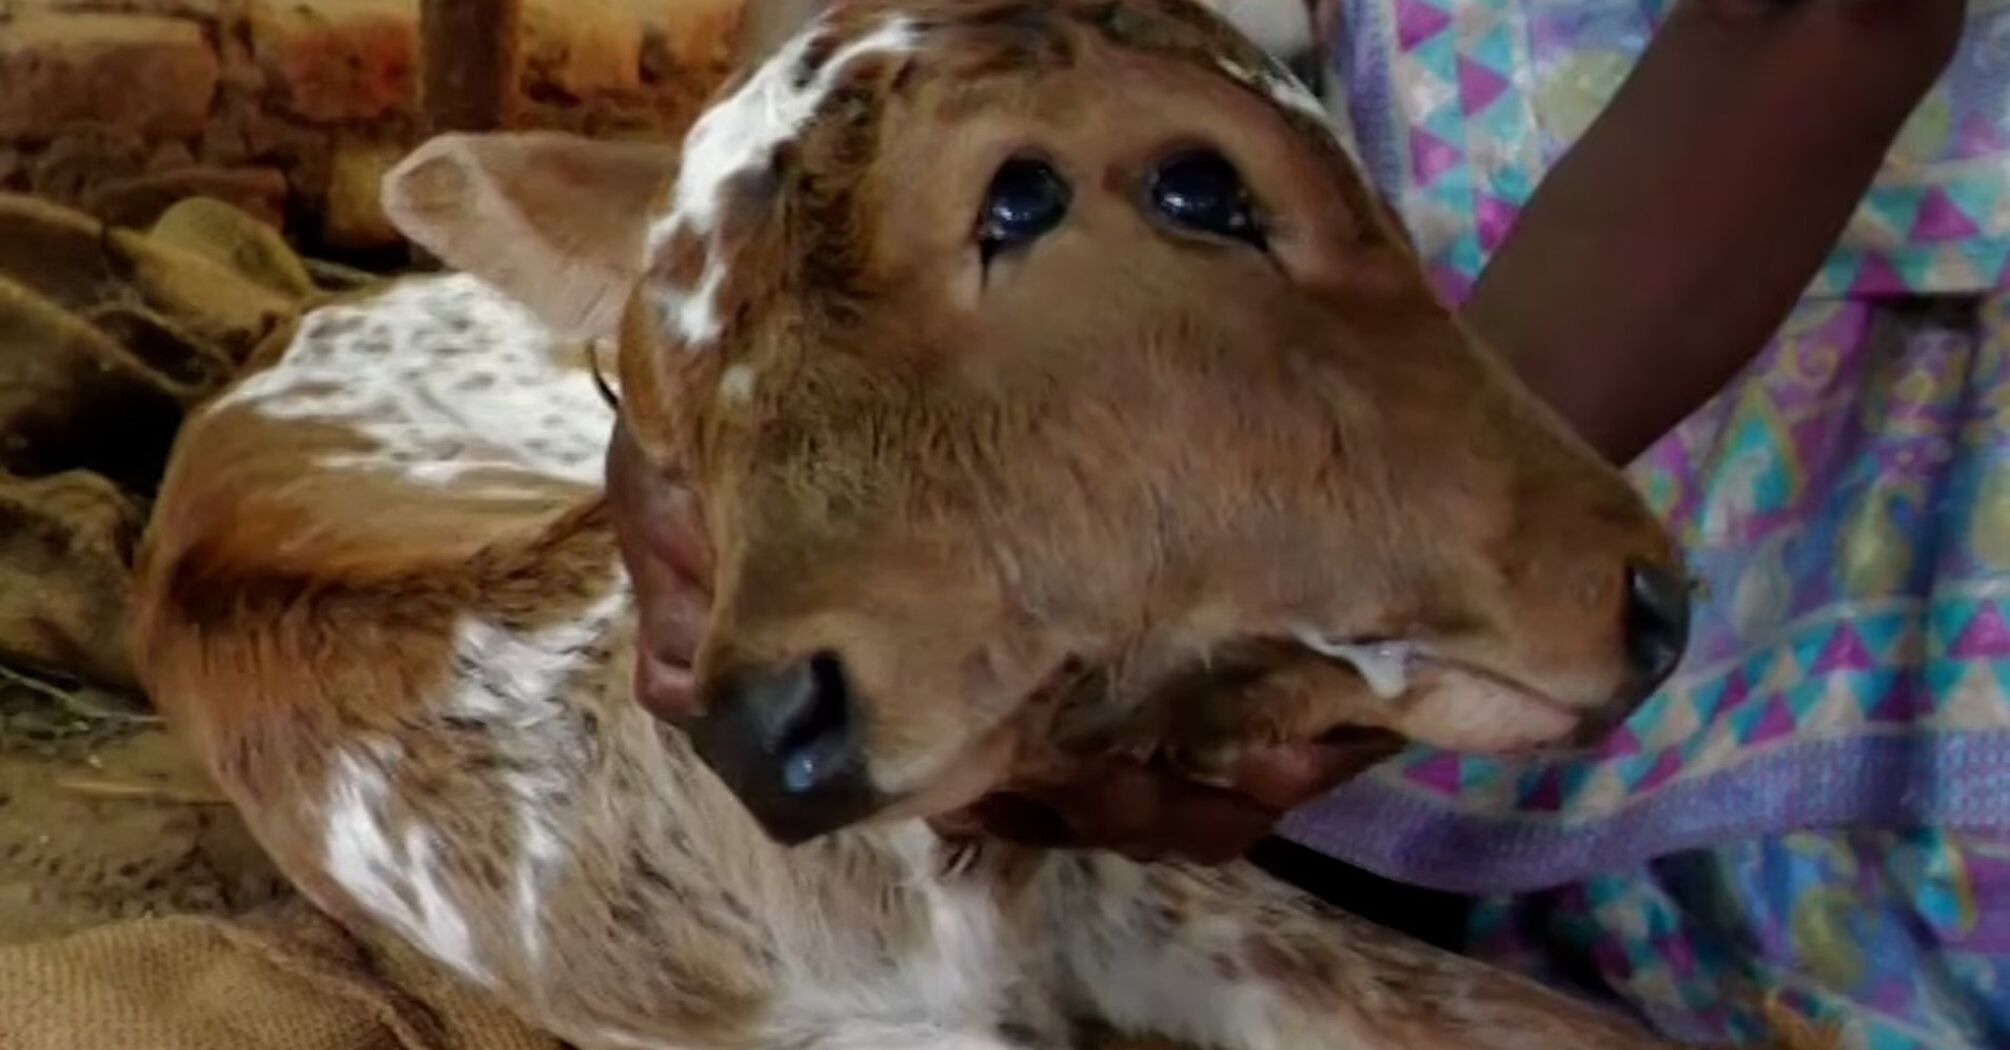 Mutant calf born with two heads and three mouths